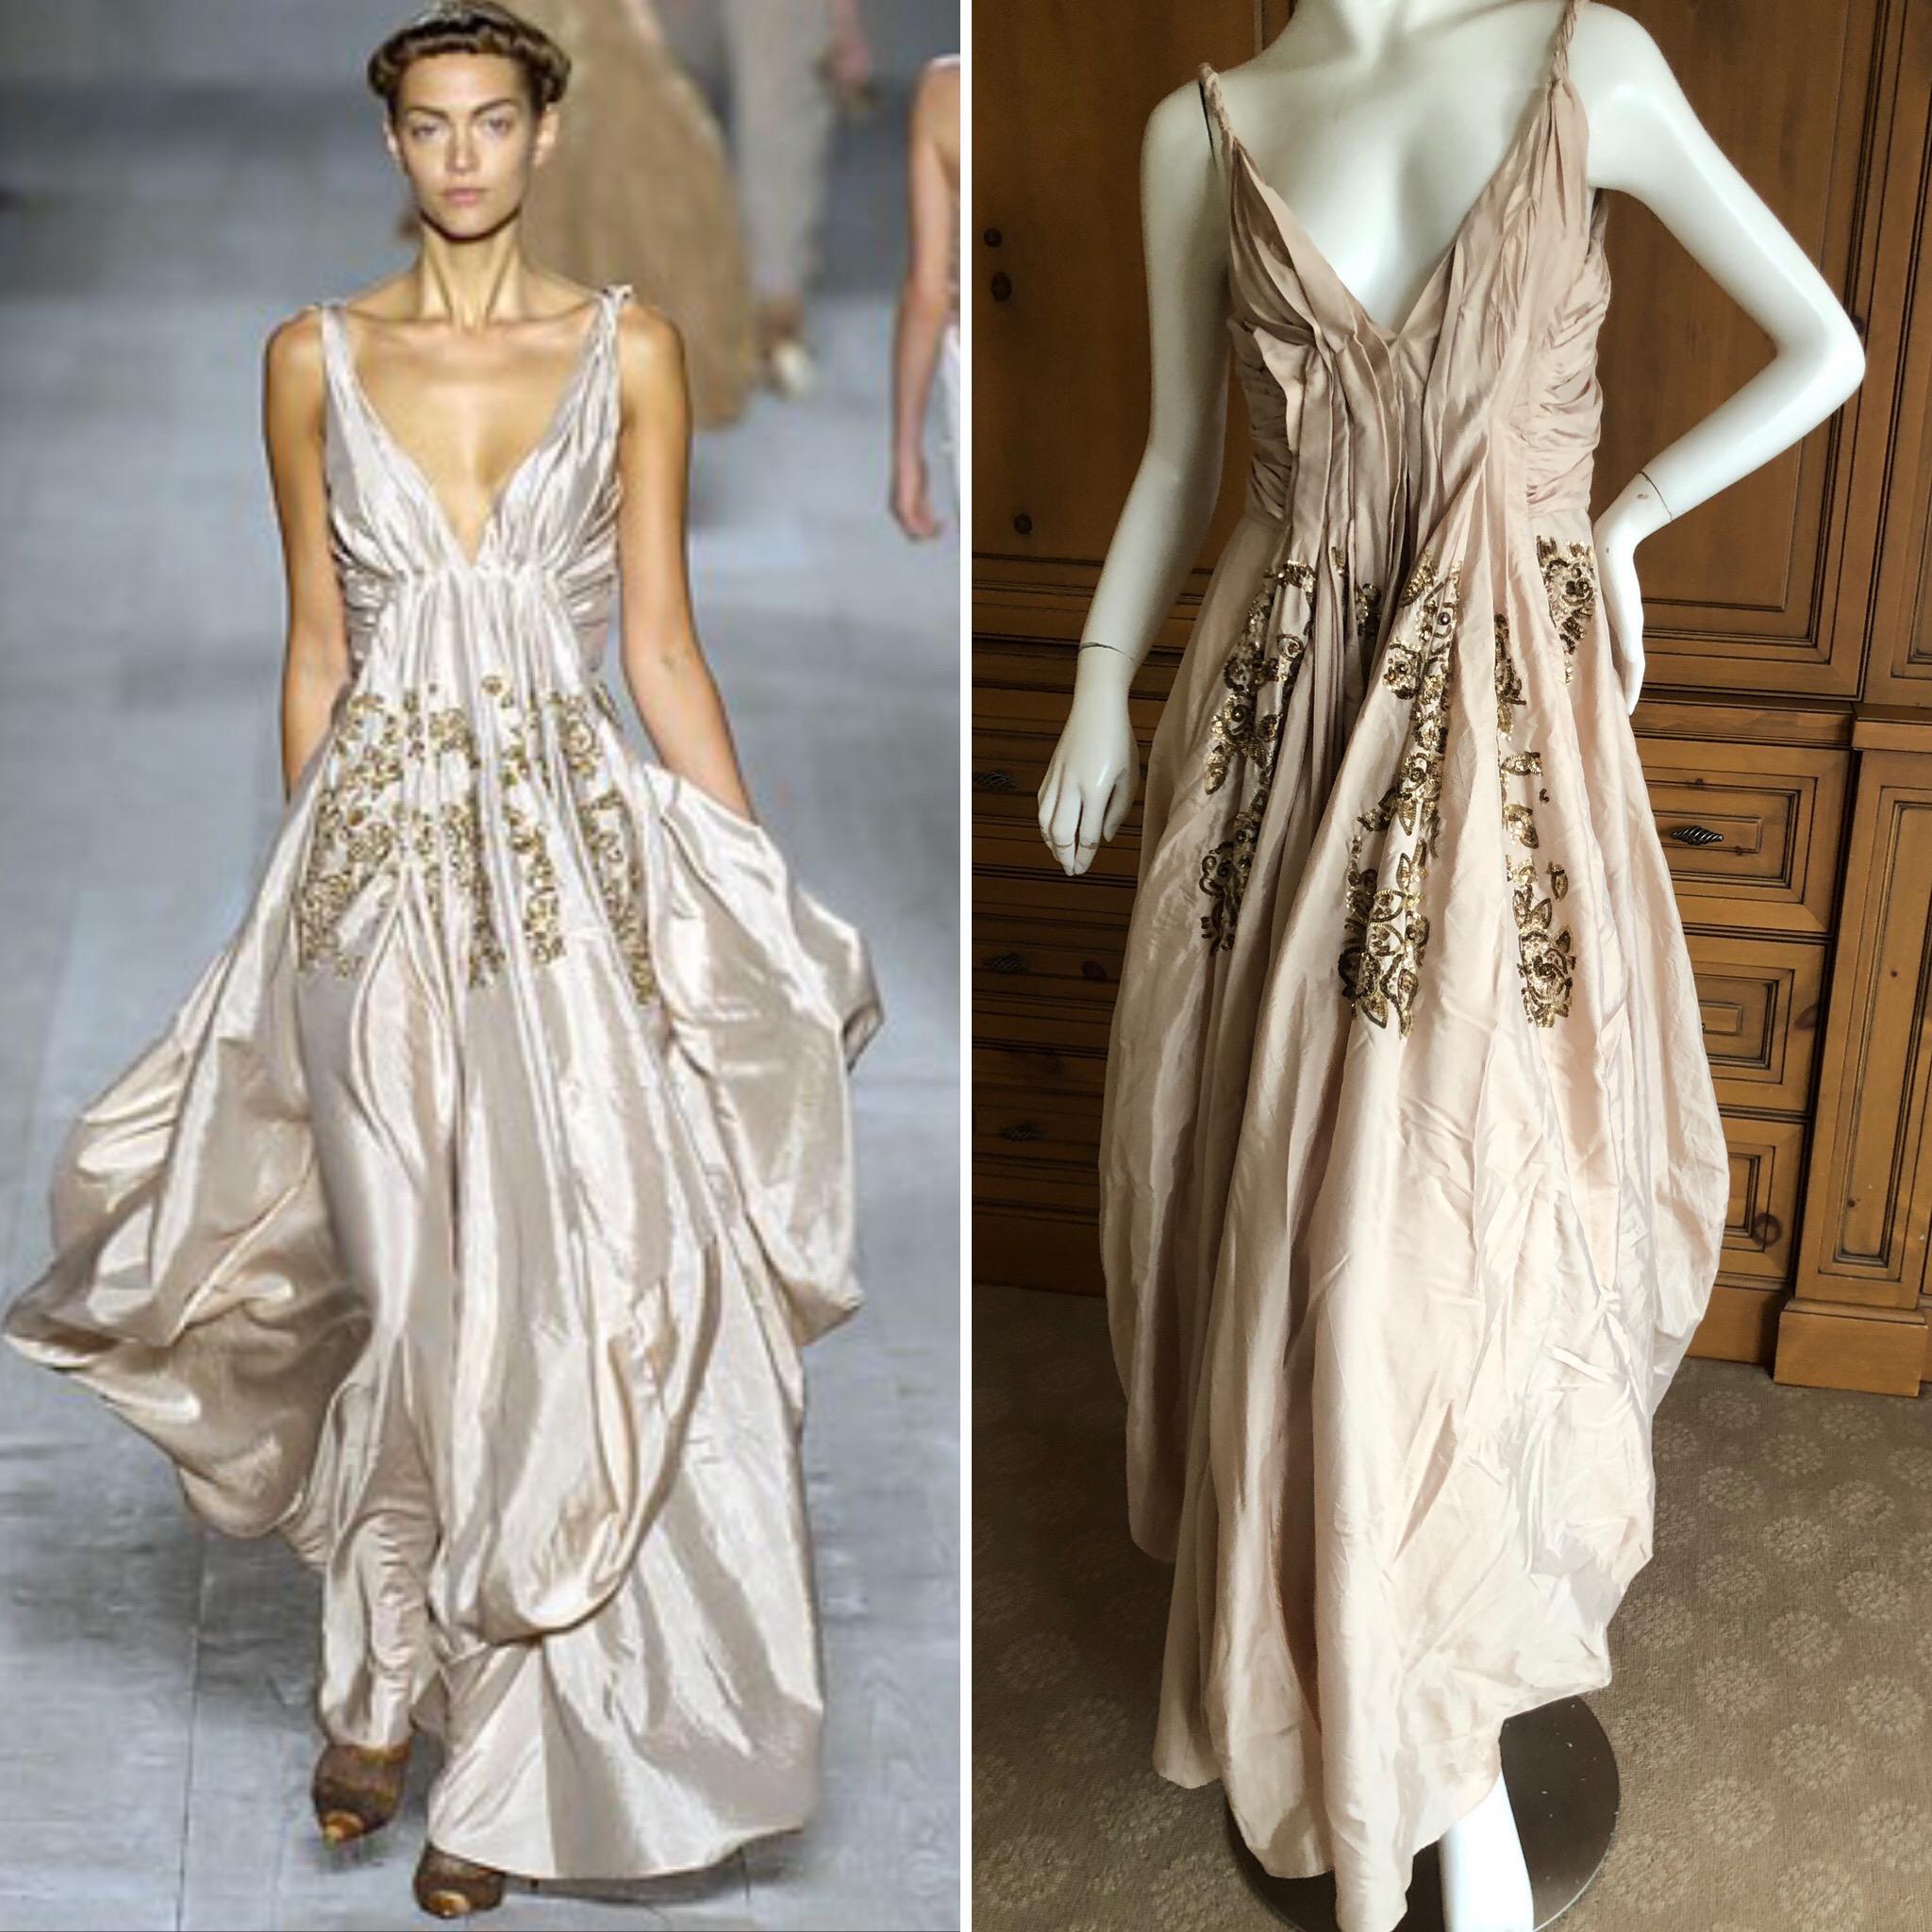  Christian Dior by John Galliano Evening Dress with Gold Sequin Floral Details from Spring 2007
This is so pretty, with miles of silk in the skirt.
Size 40 French 8 US
 Bust 36